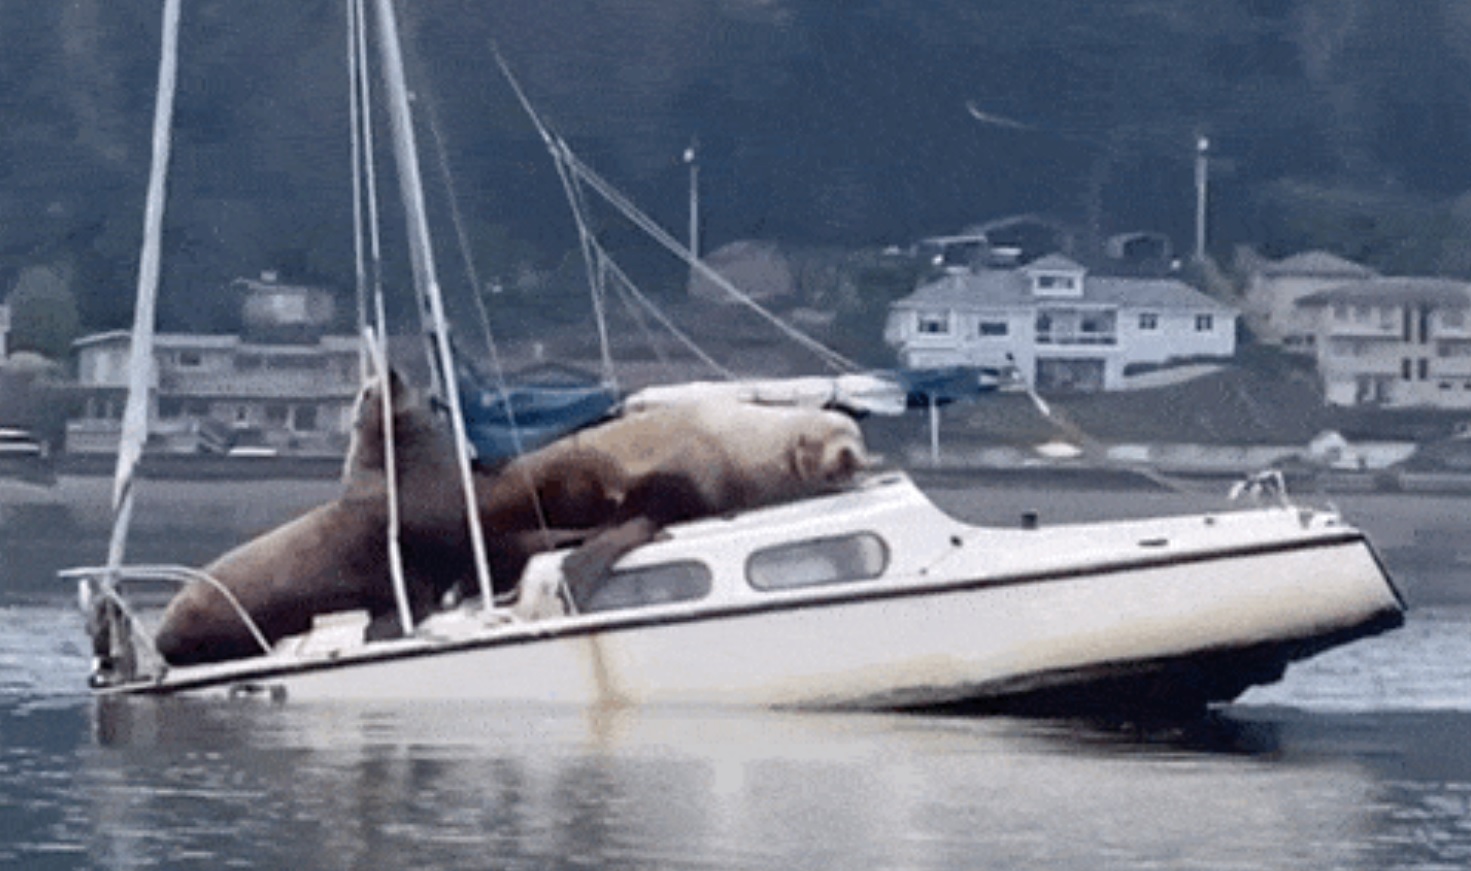 Footage of two Steller sea lions commandeering a small boat in Olympia, Washington has gone viral.
